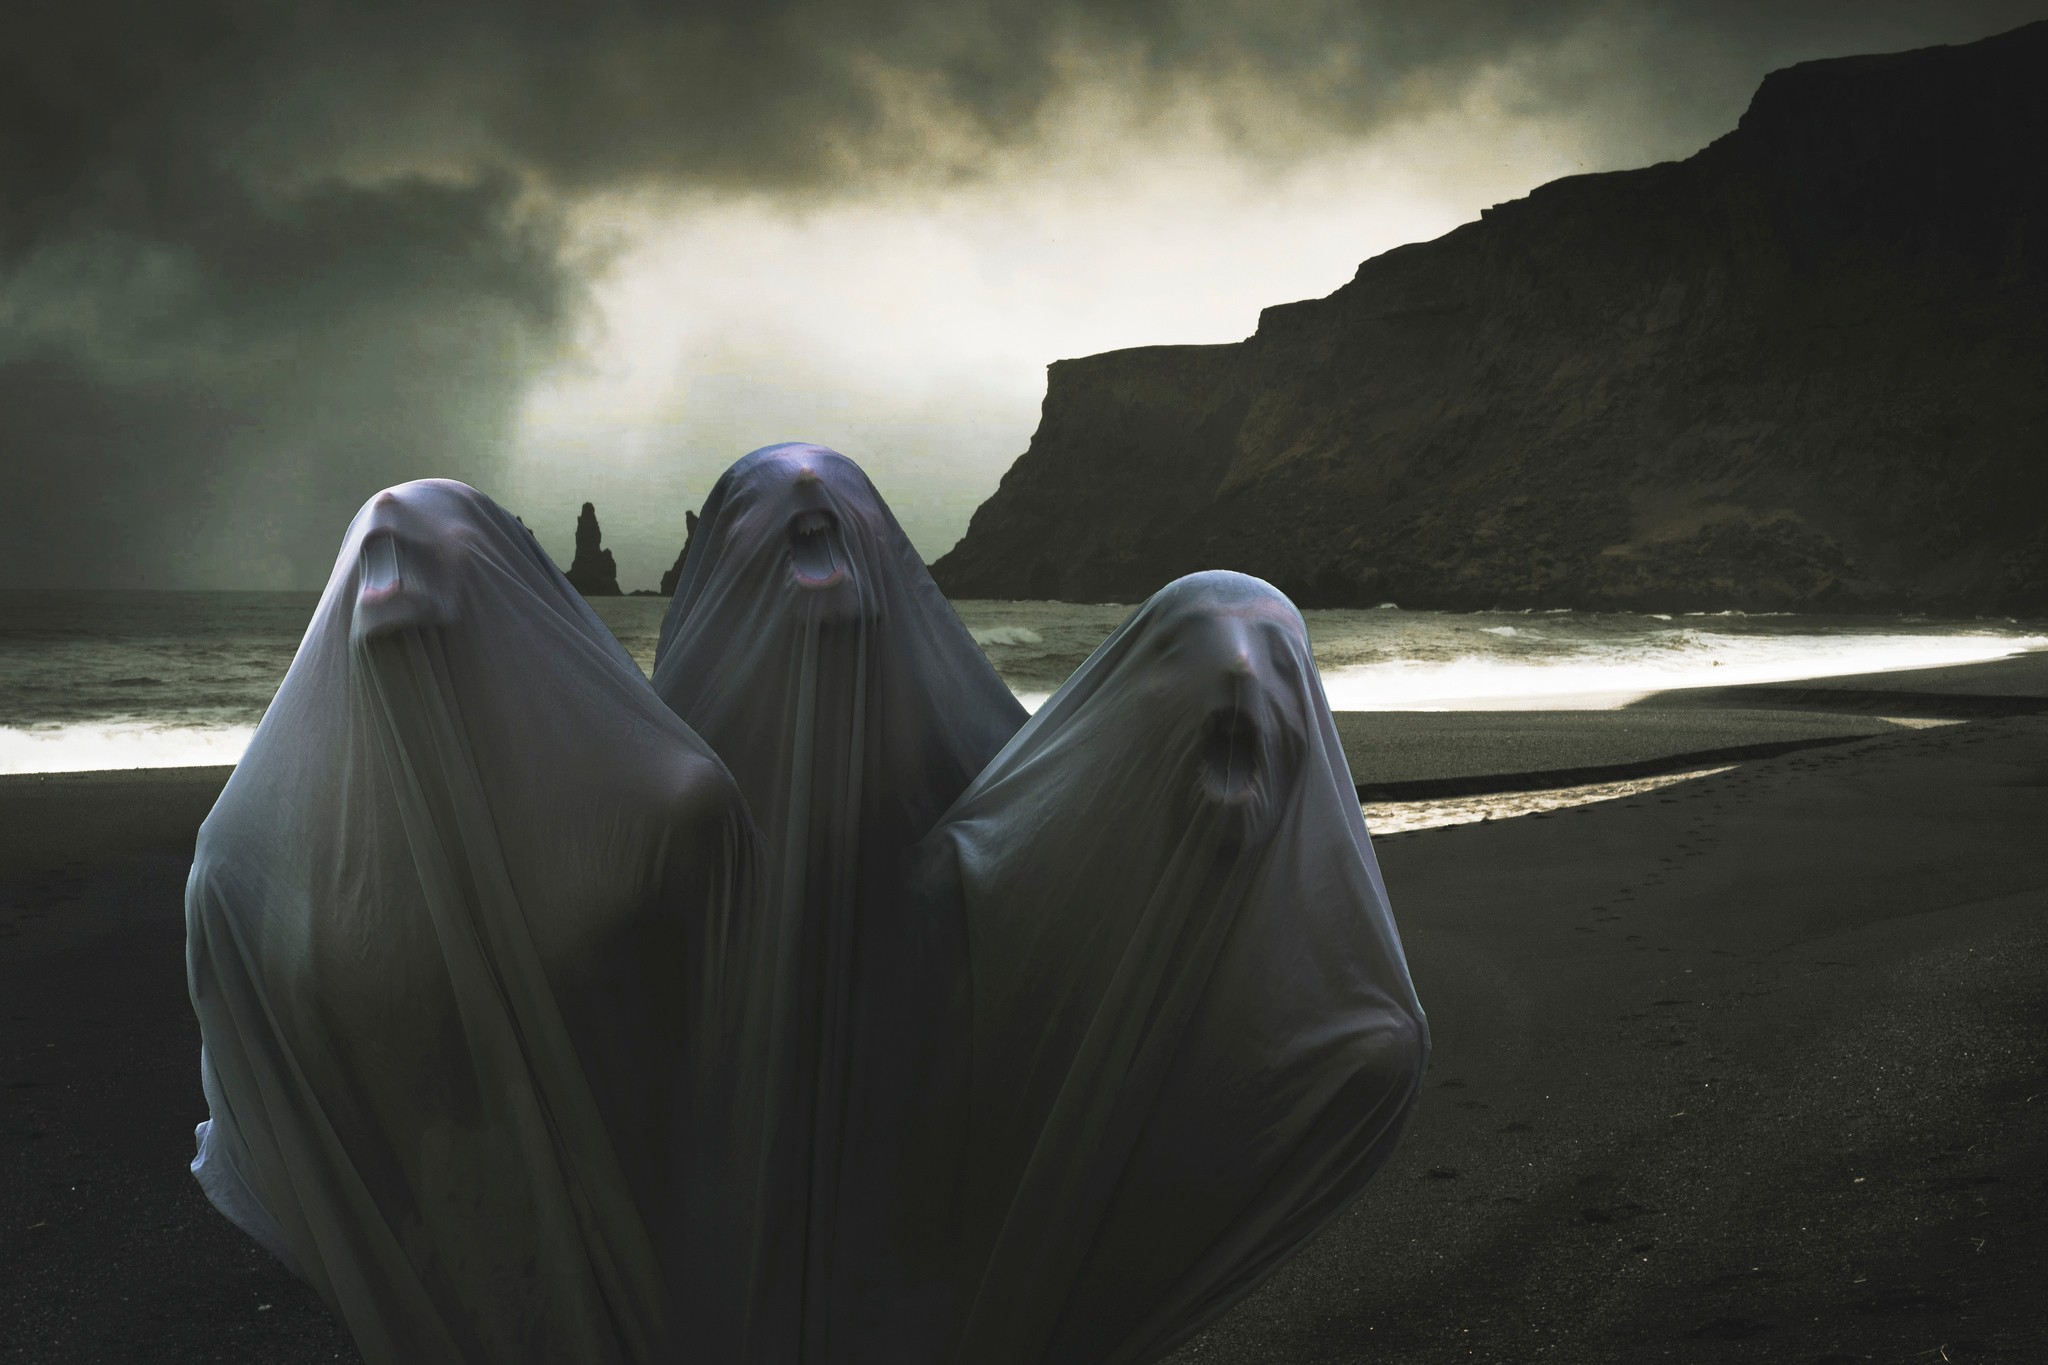 General 2048x1365 artwork surreal landscape sea spooky ghost death beach see-through clothing screaming open mouth black sand overcast men